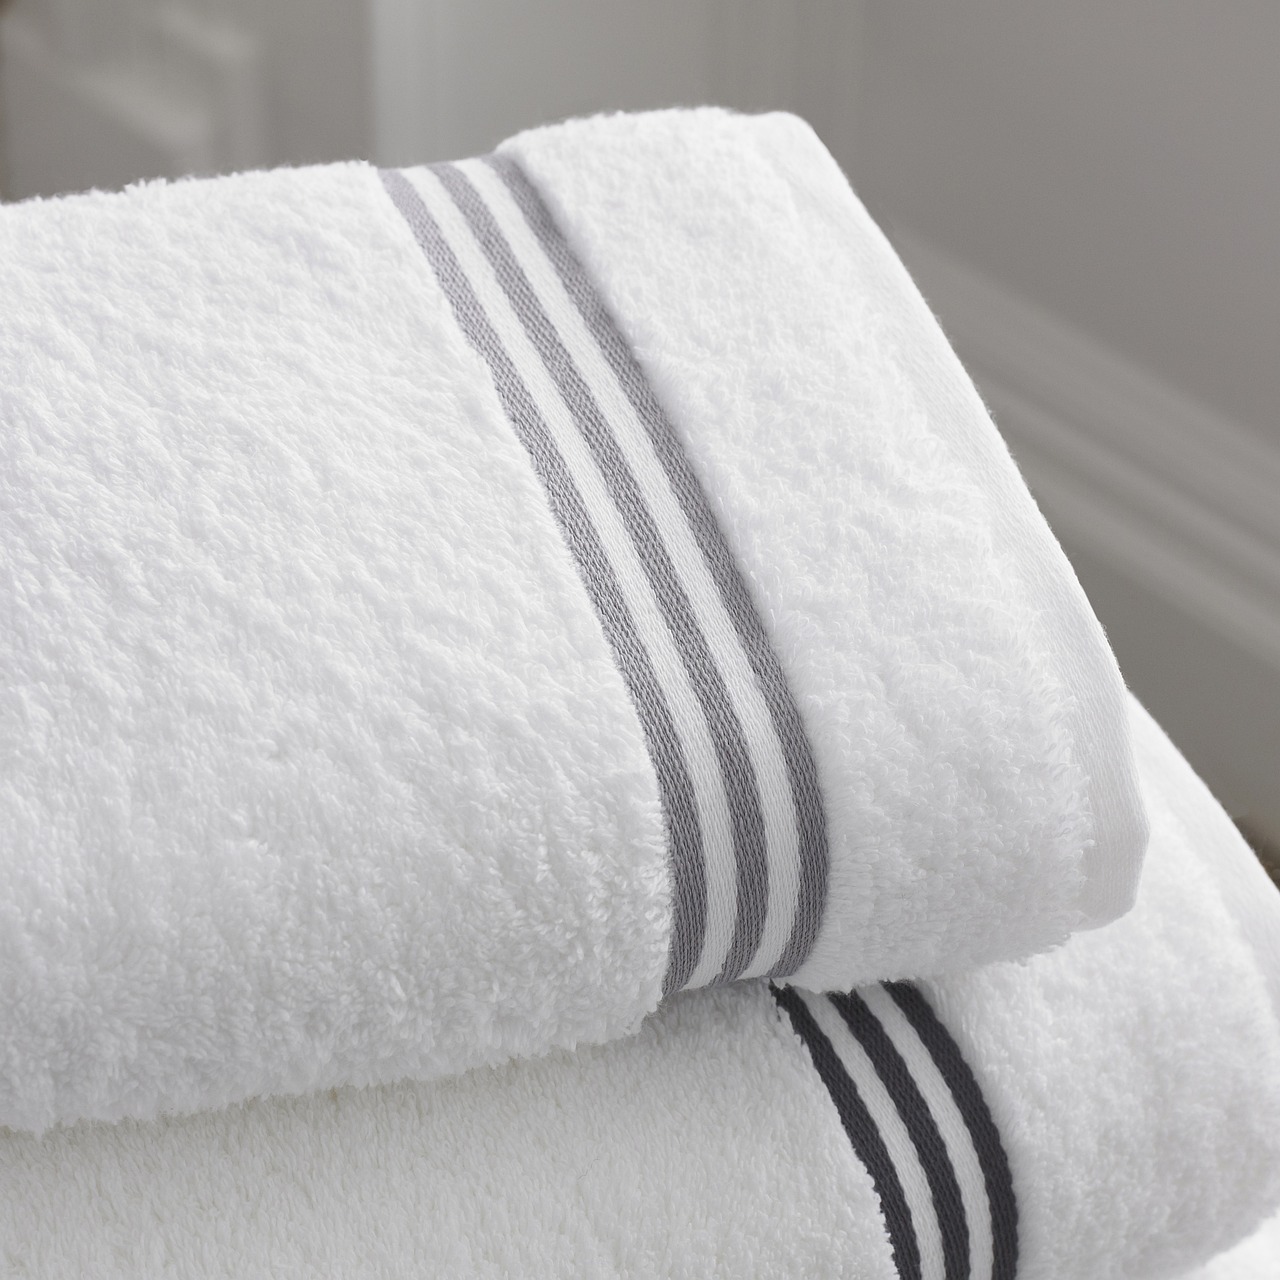 The Importance of Choosing the Right Bath Towel